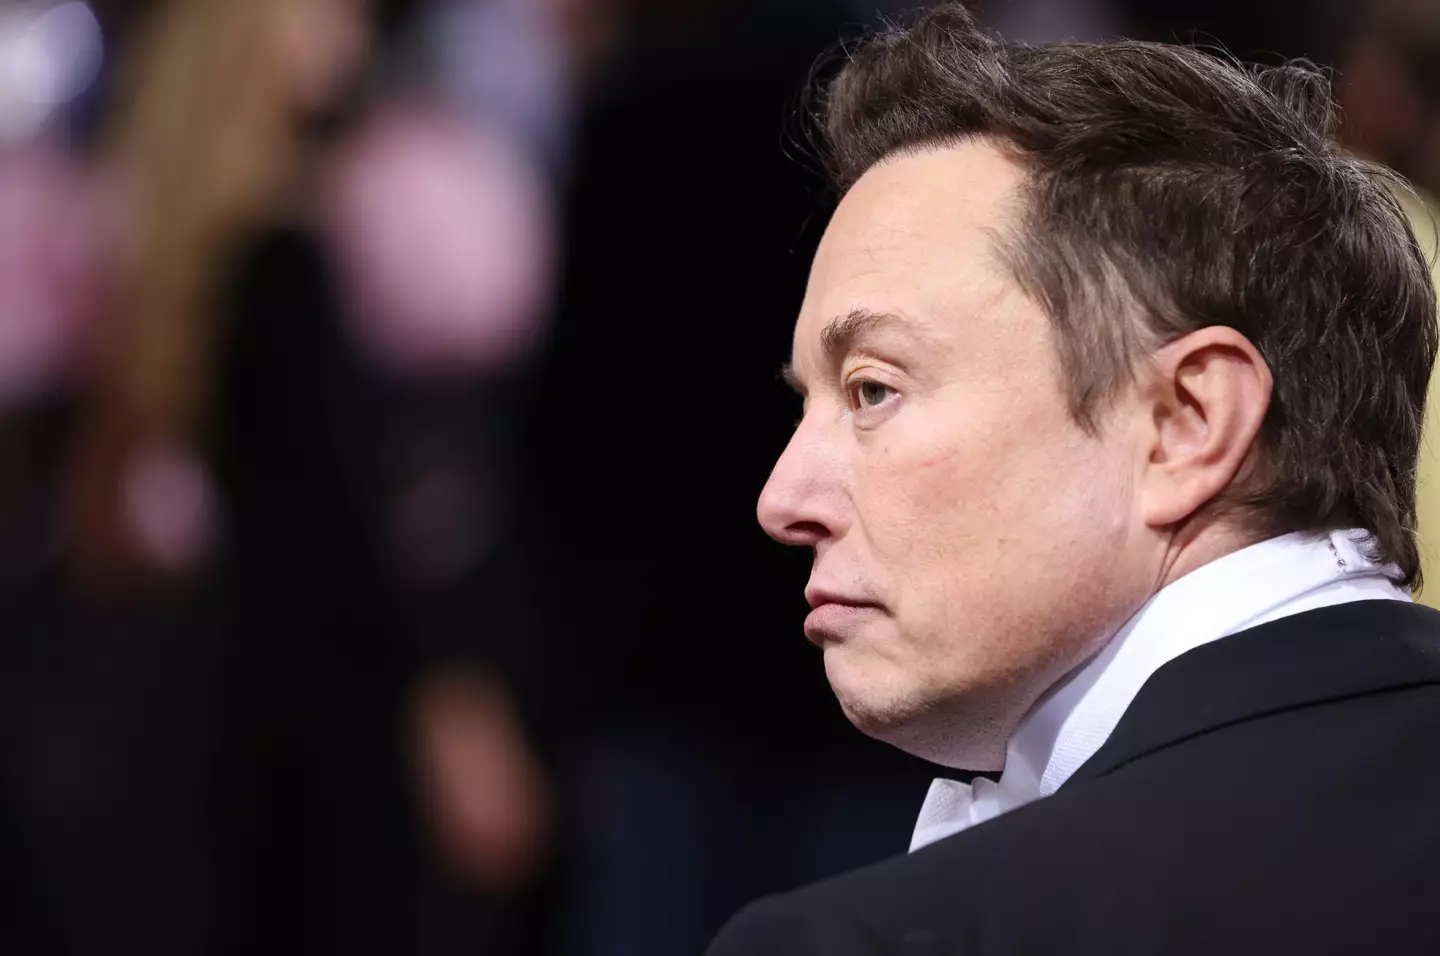 Elon Musk has called out the Department of Justice for failing to reveal those who networked with Jeffrey Epstein and Ghislaine Maxwell. (